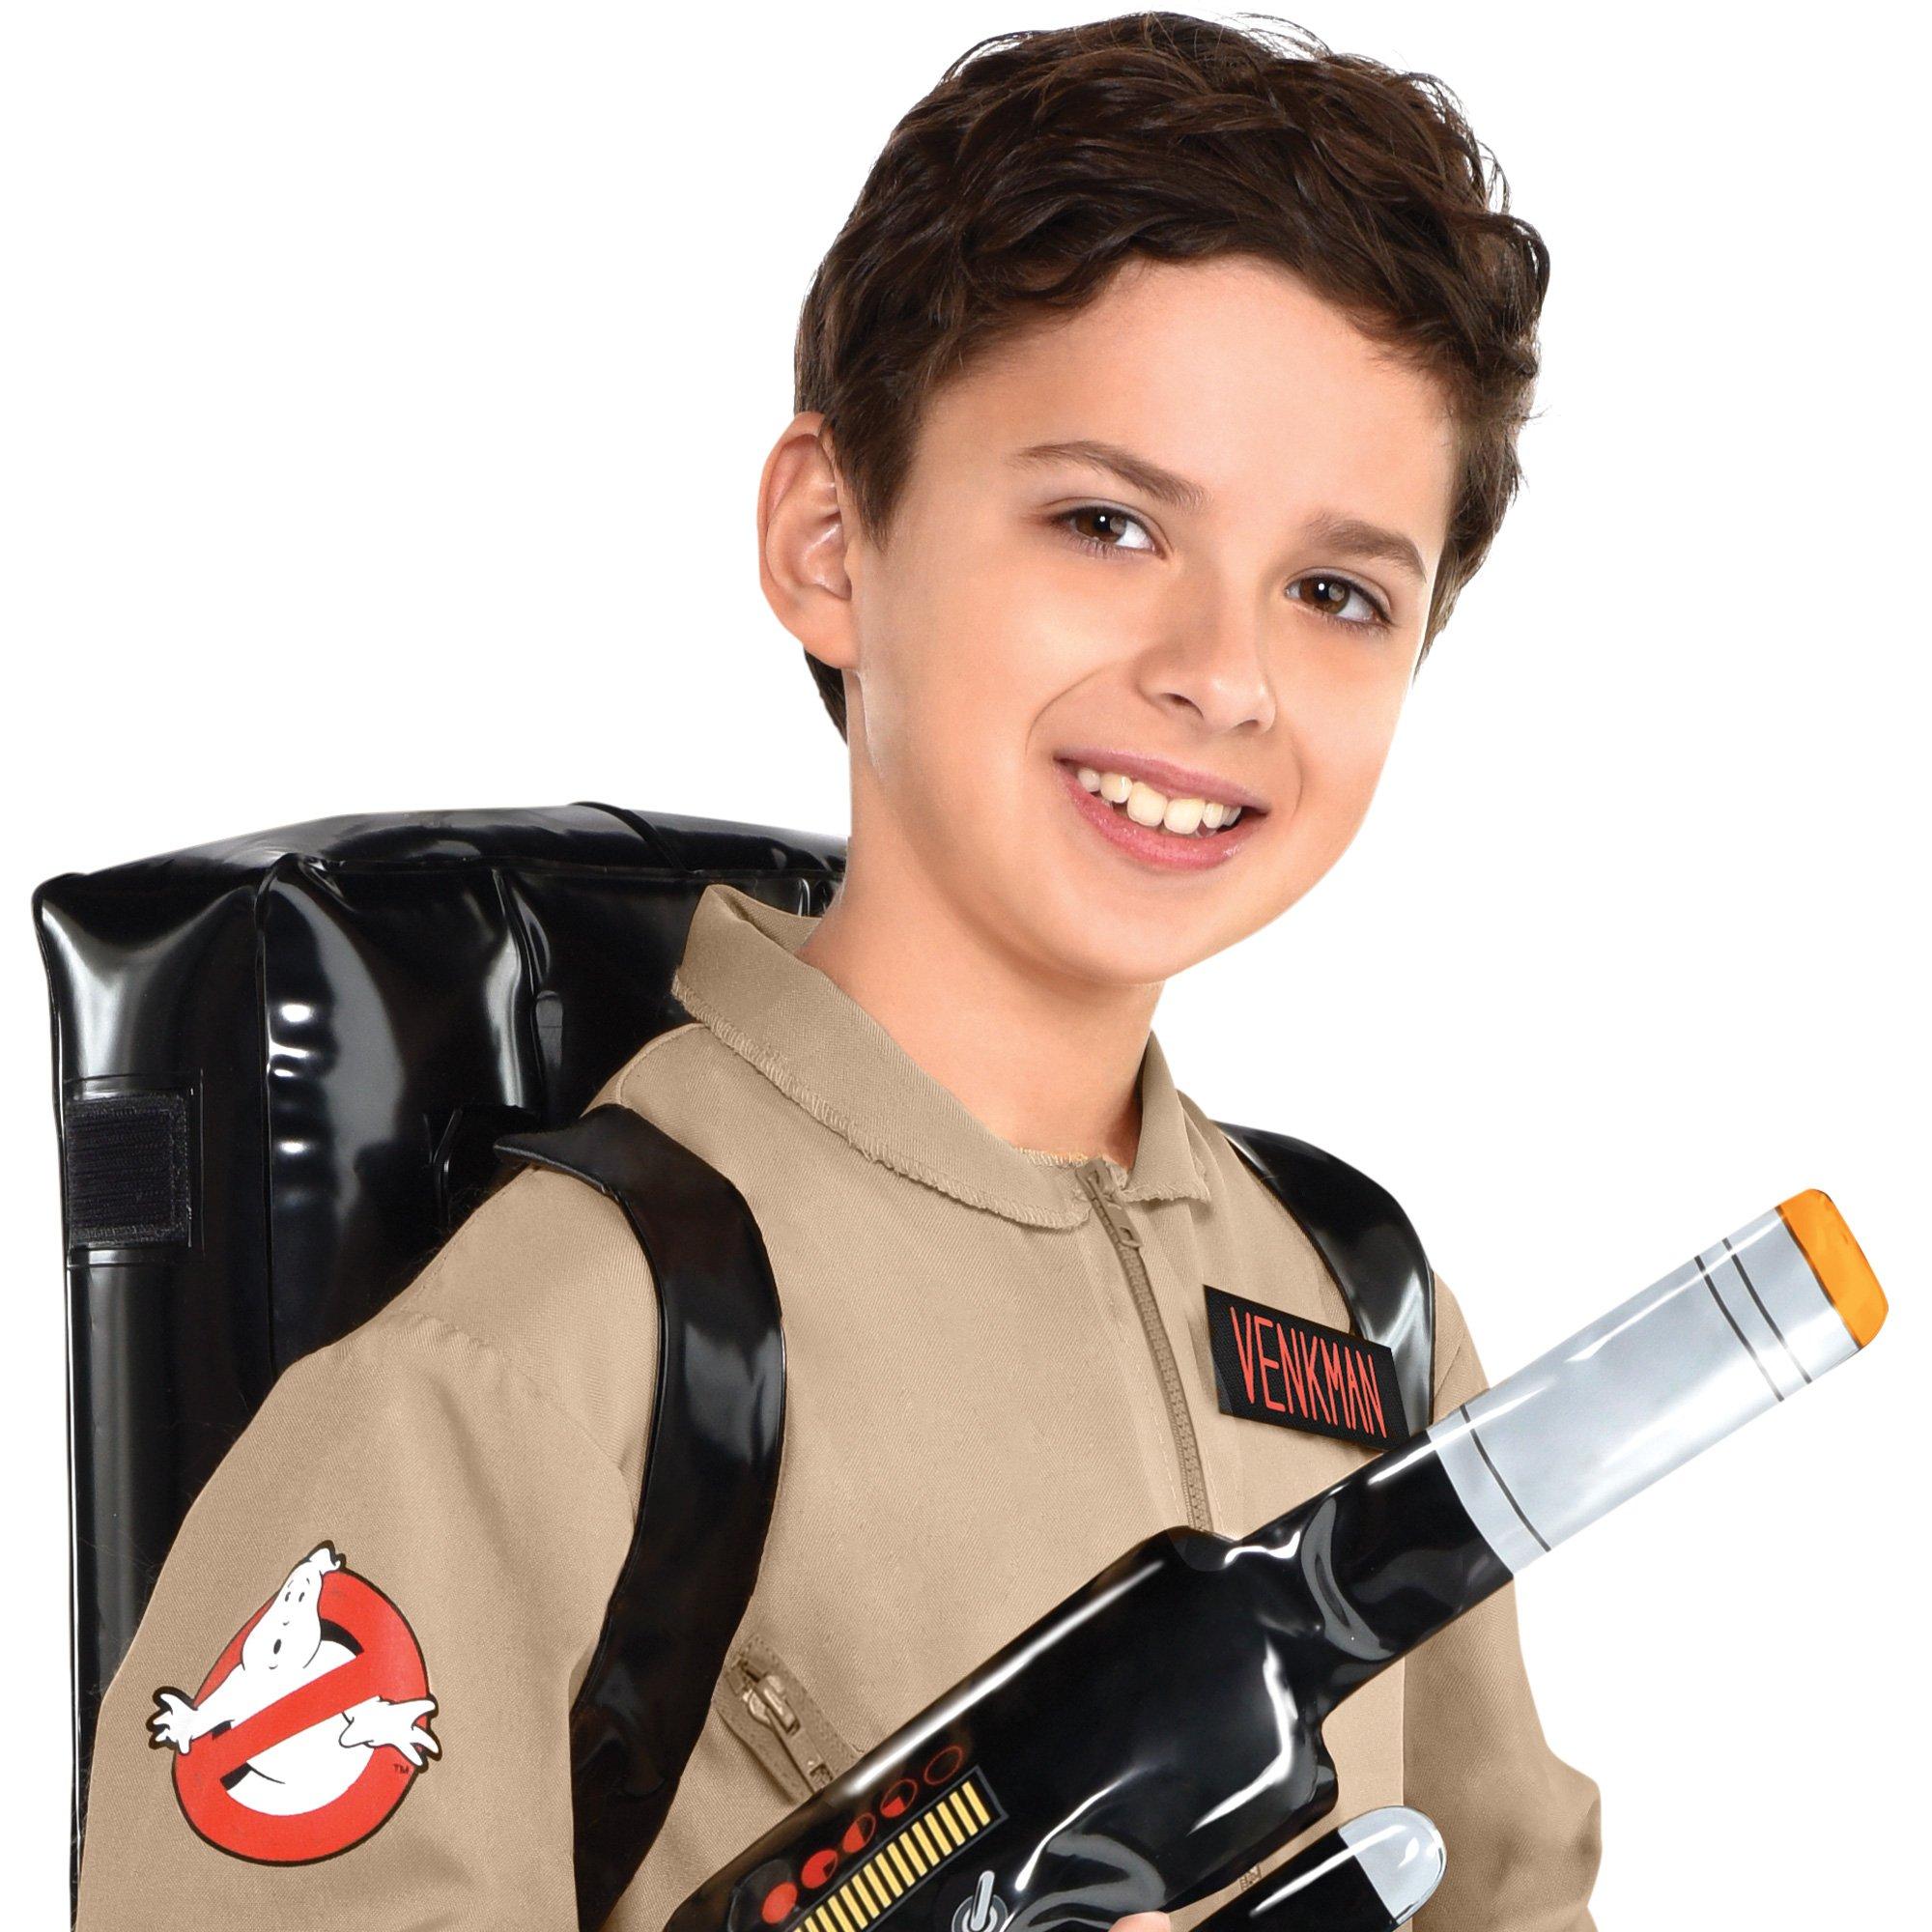 Kids' Ghostbusters Deluxe Costume with Proton Pack